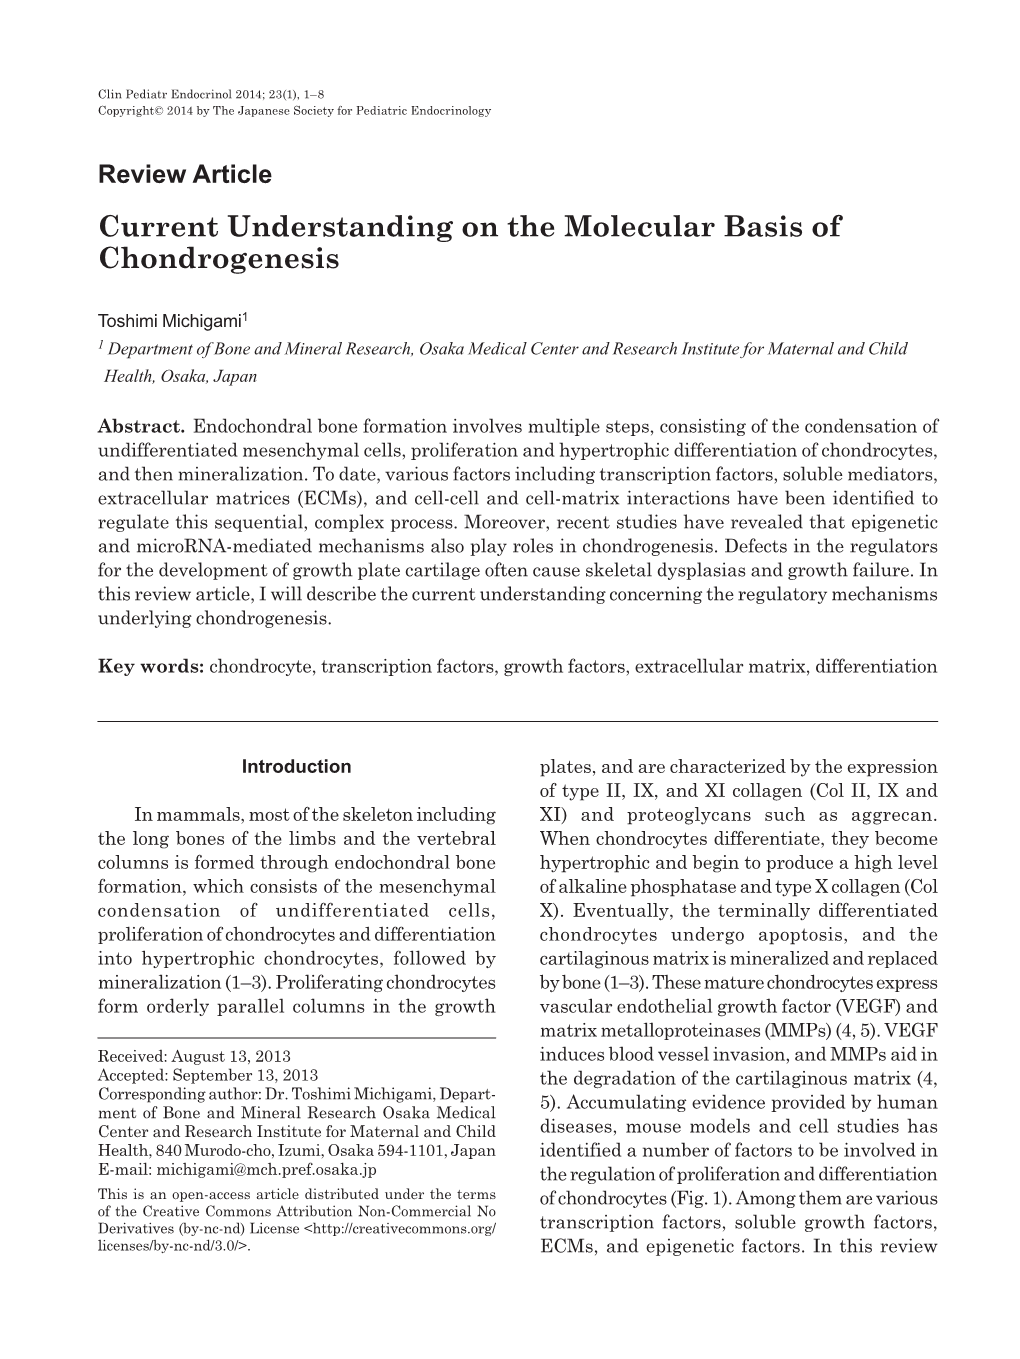 Current Understanding on the Molecular Basis of Chondrogenesis